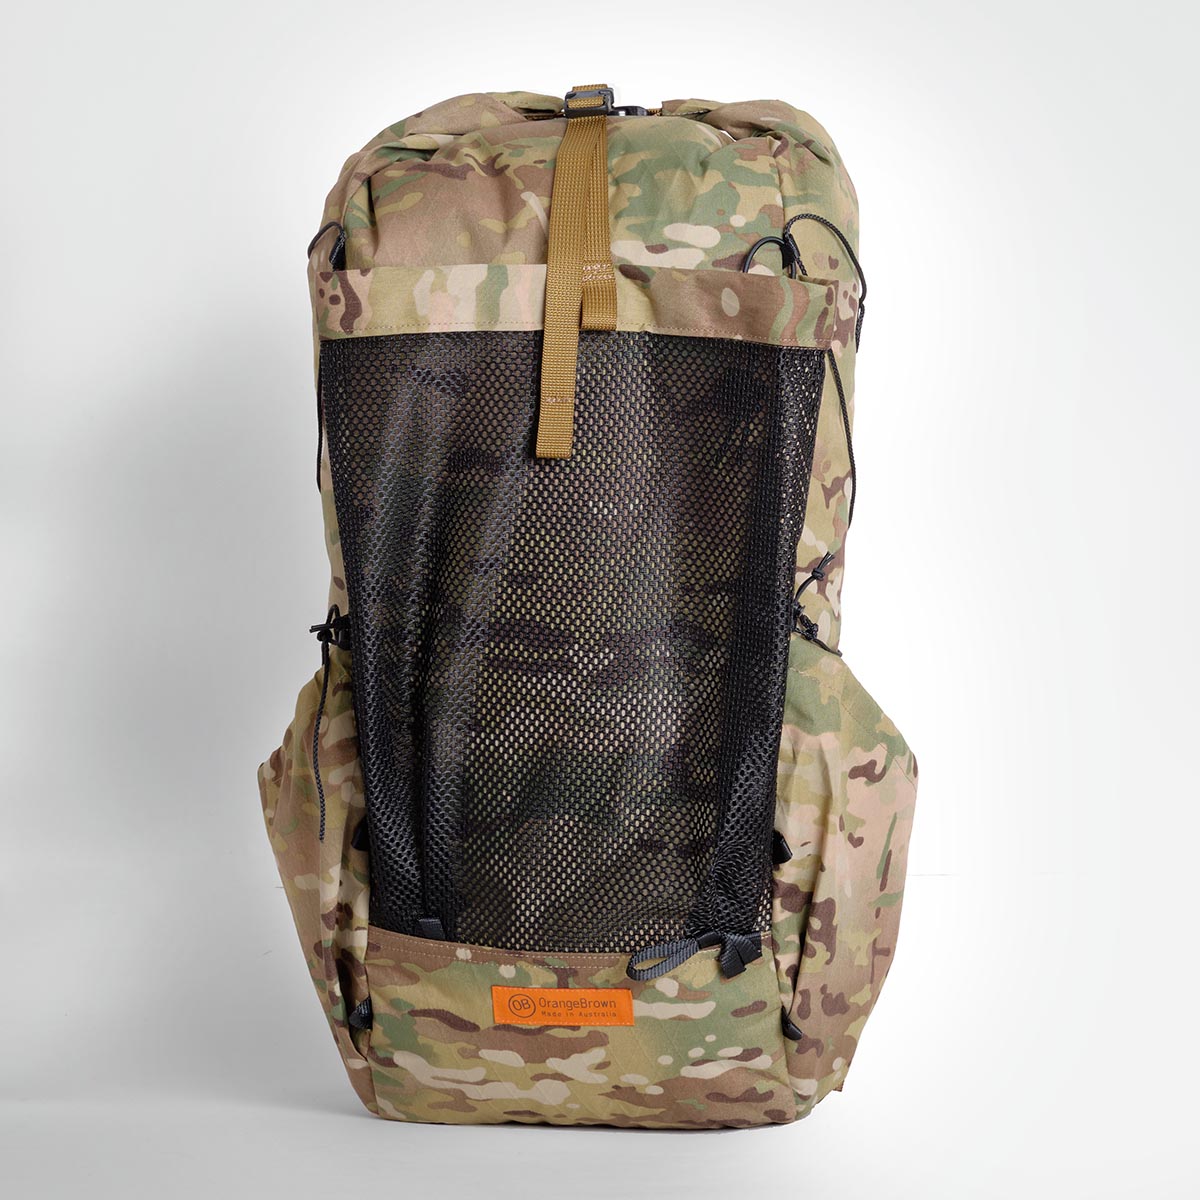 Medium sized backpack with 36 L volume made by OrangeBrown. Manufactured in Australia from X-Pac X33 multicam fabric.